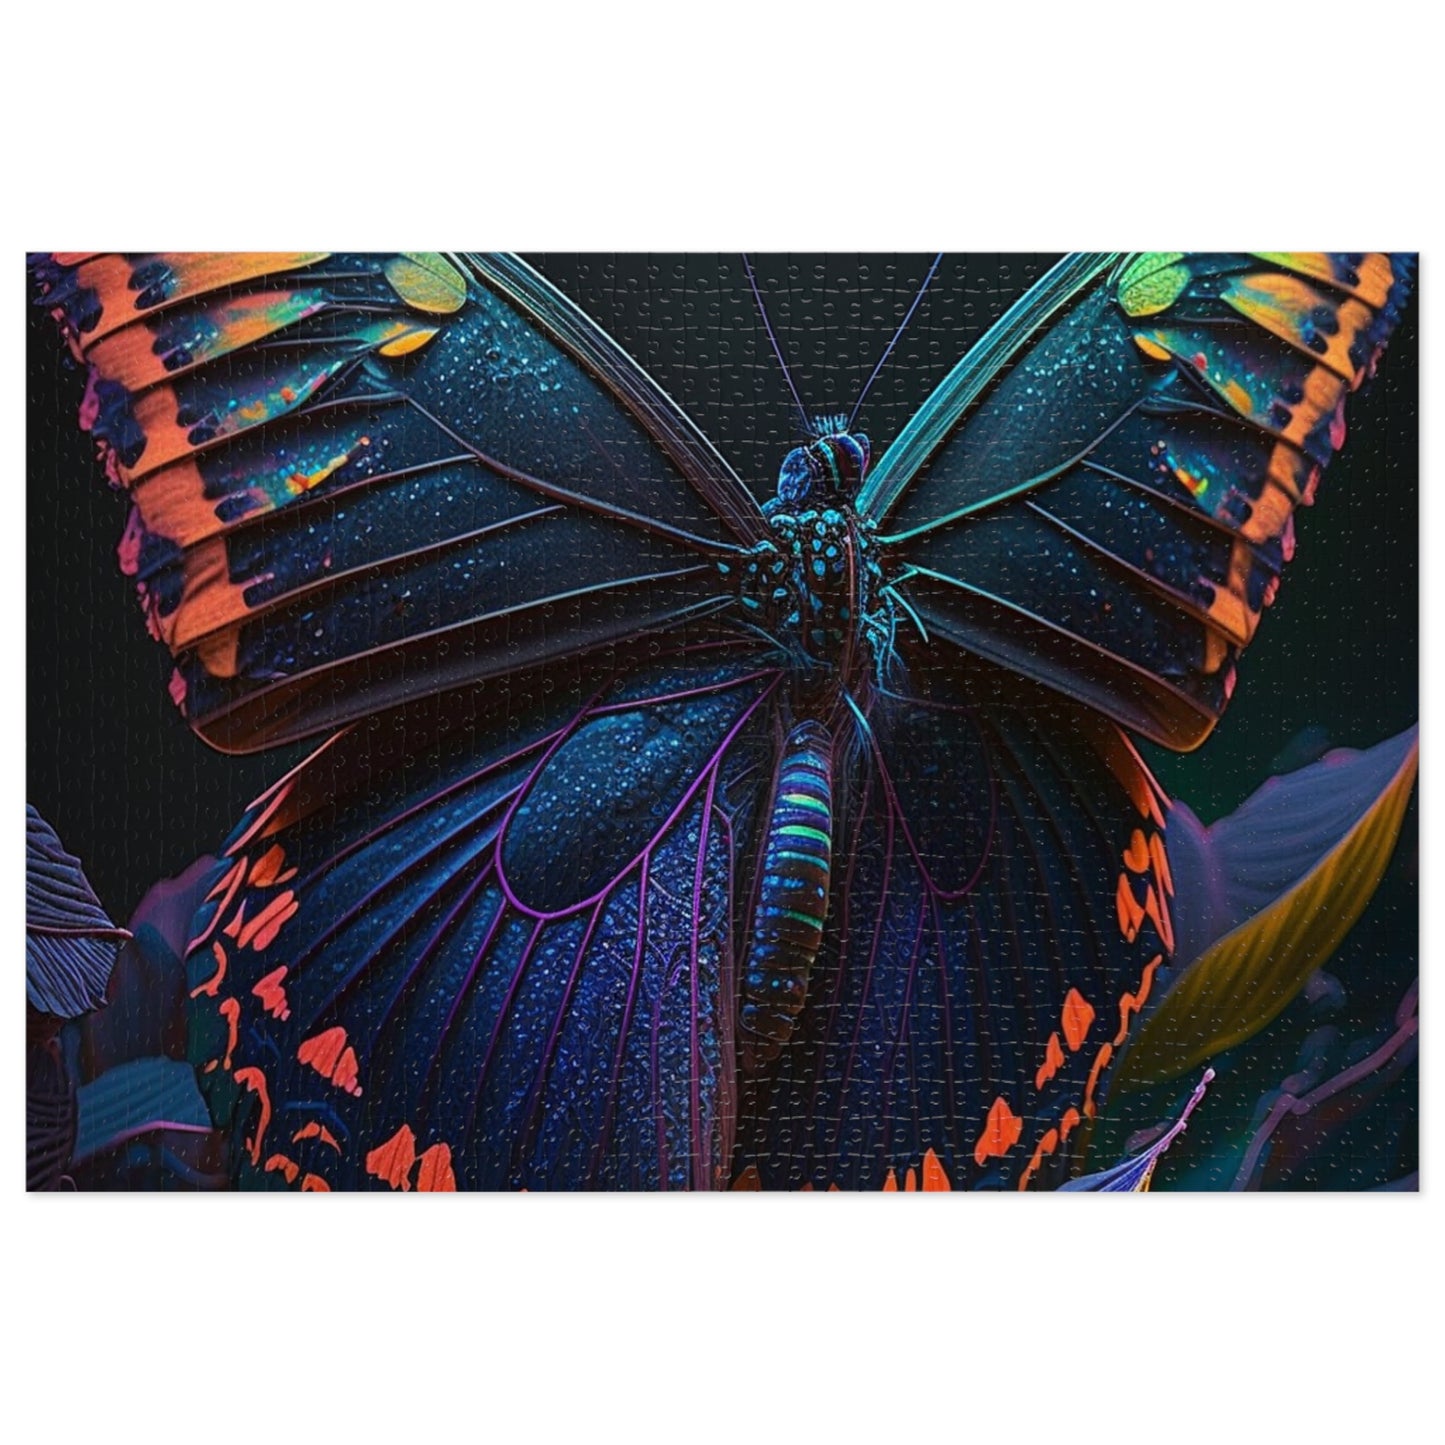 Jigsaw Puzzle (30, 110, 252, 500,1000-Piece) Hue Neon Butterfly 3